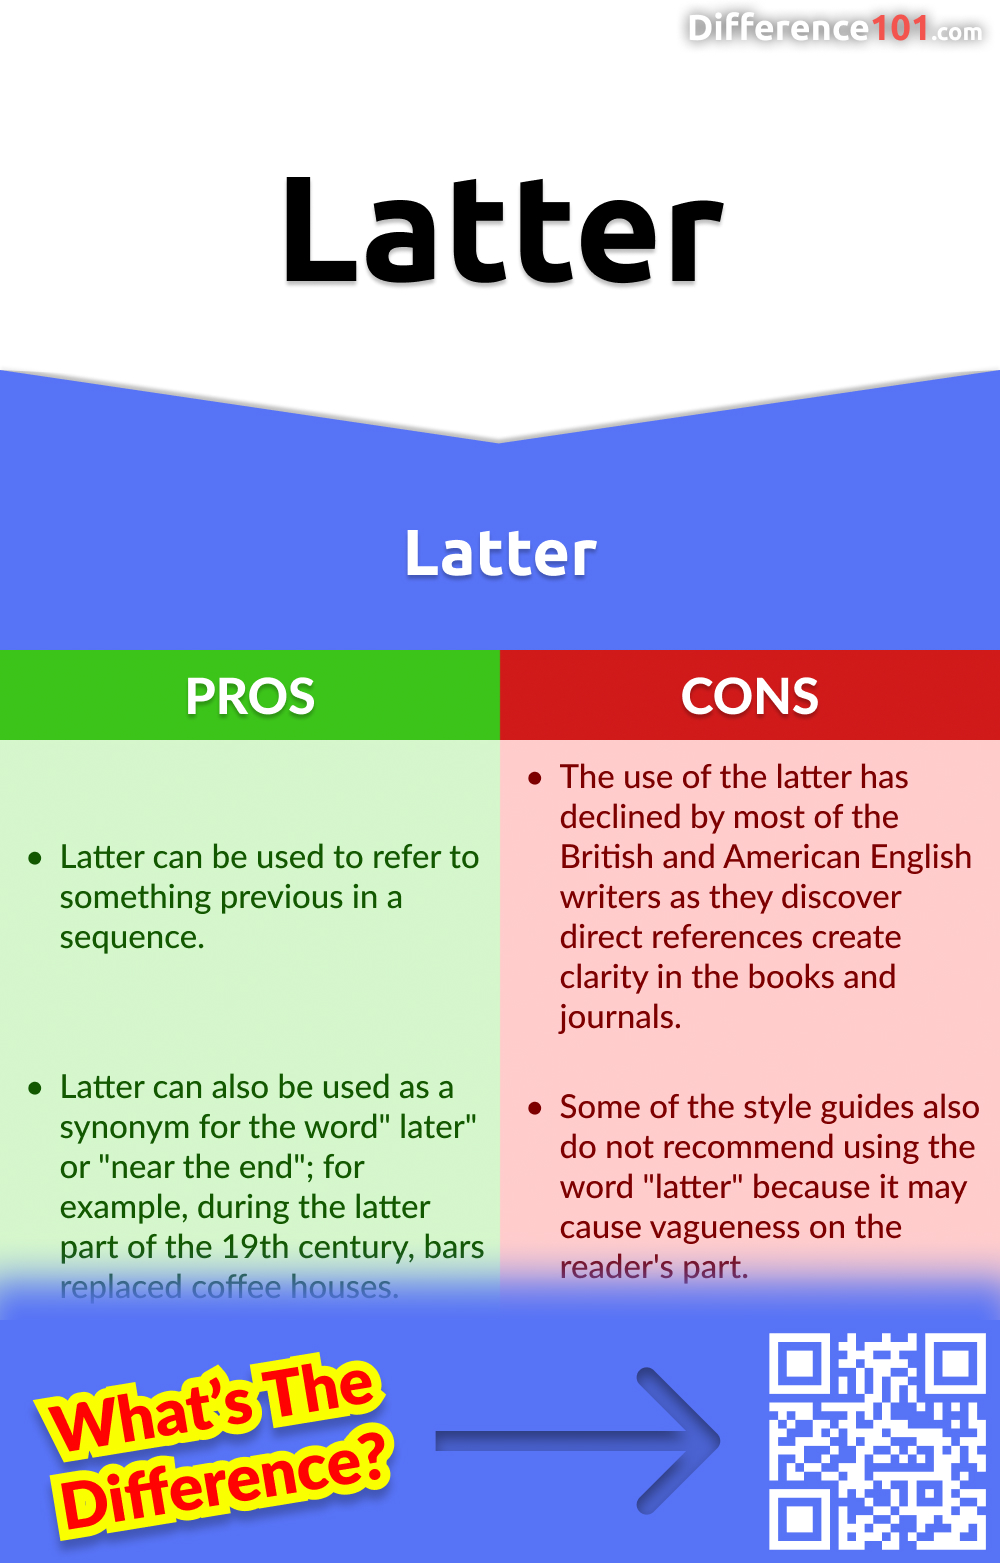 Latter Pros and Cons